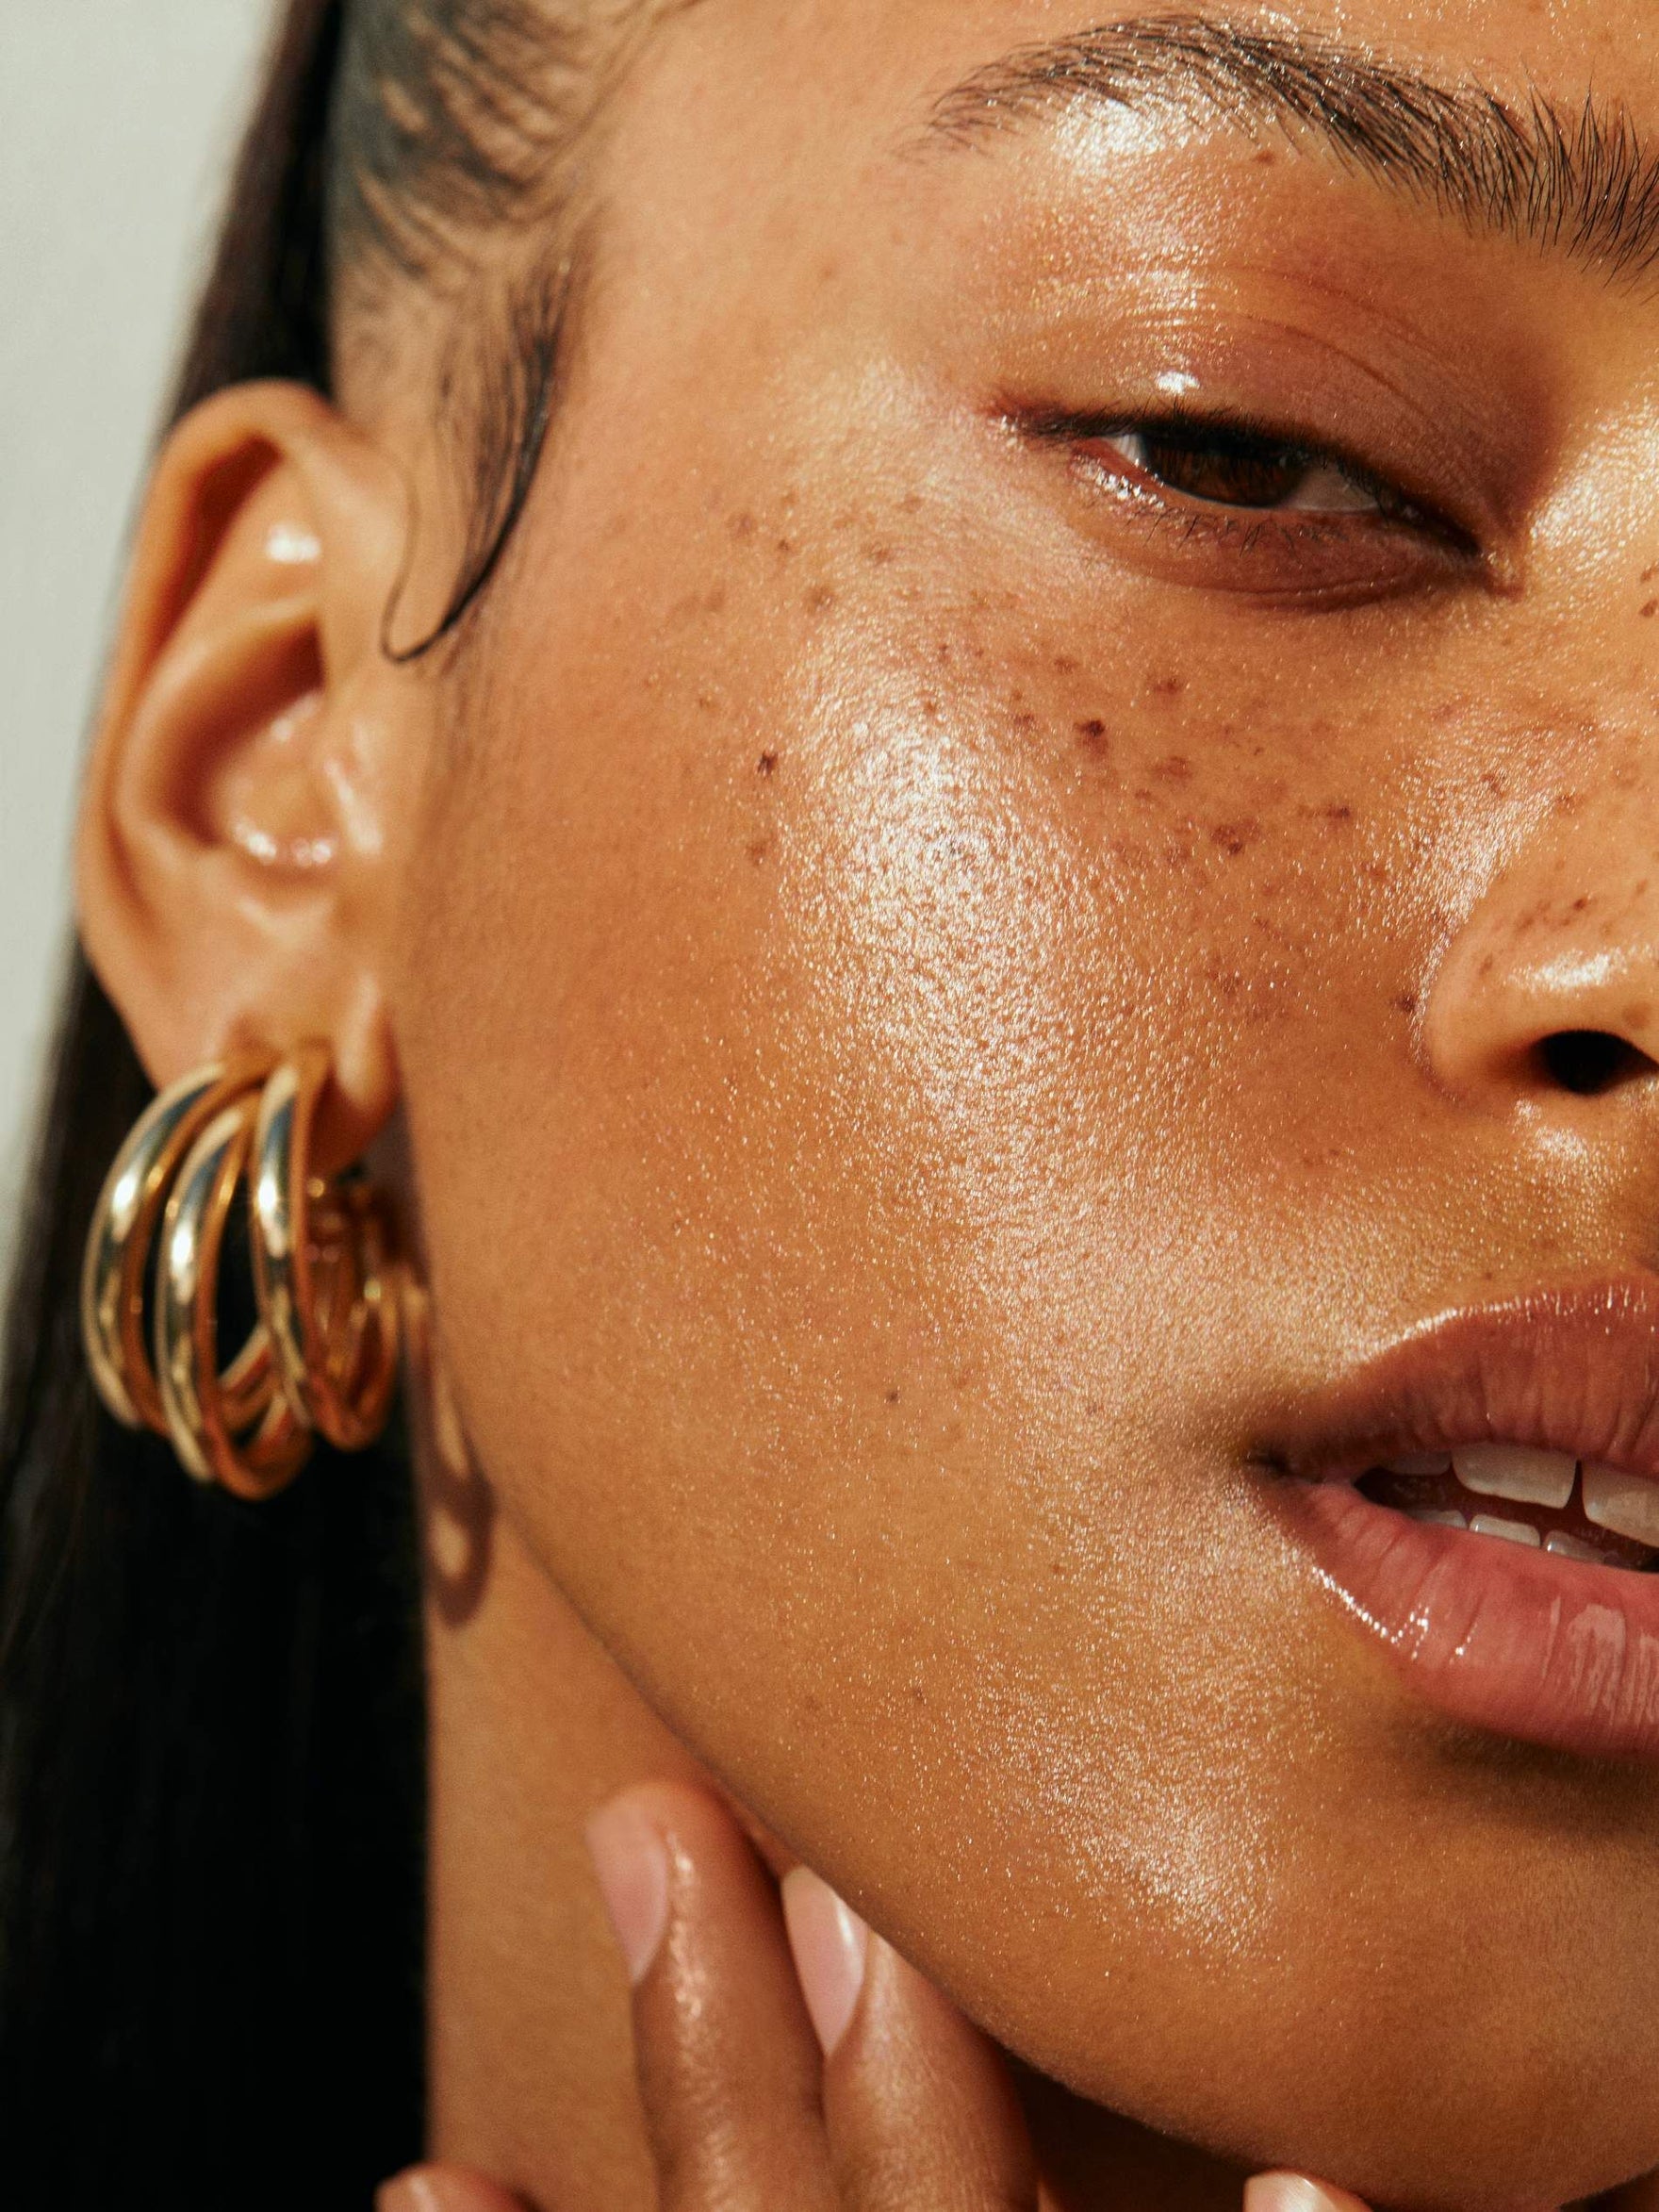 GET THE SUMMER GLOW: 6 STEPS FOR YOUR SKINCARE ROUTINE THIS SUMMER